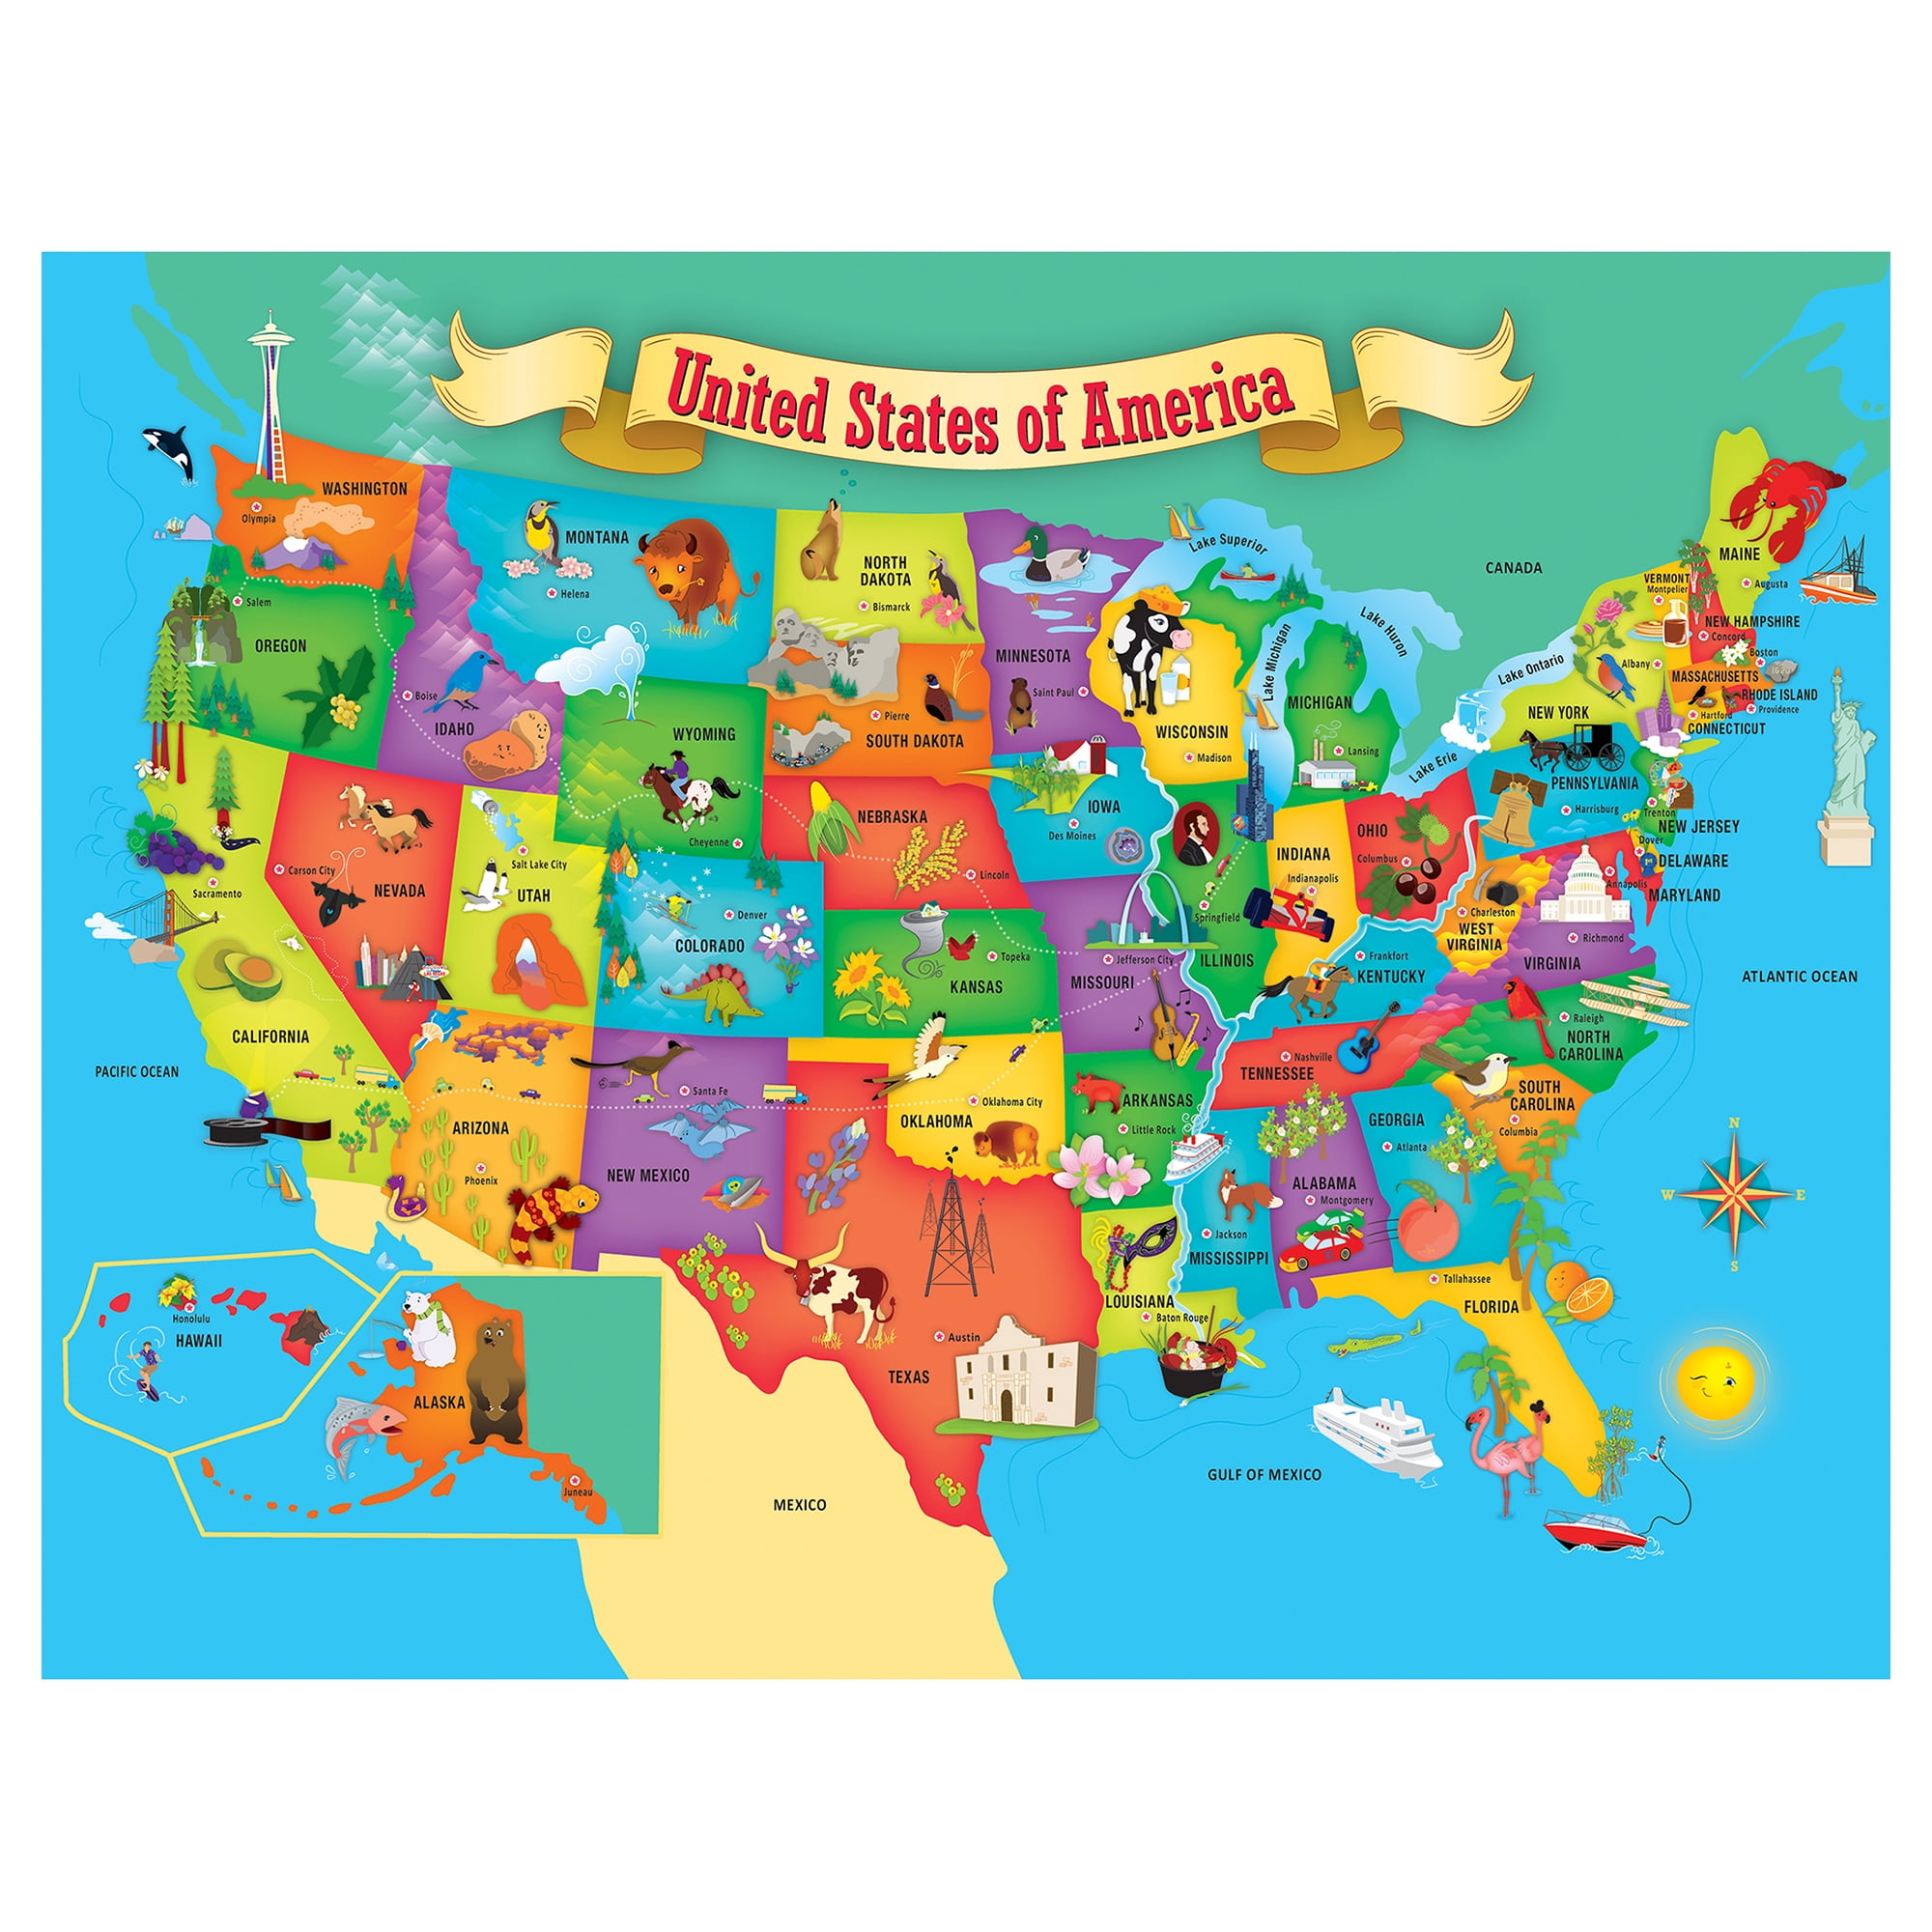 Professor Poplar's Fifty Nifty United States USA Map Wooden Jigsaw Puzzle for sale online 